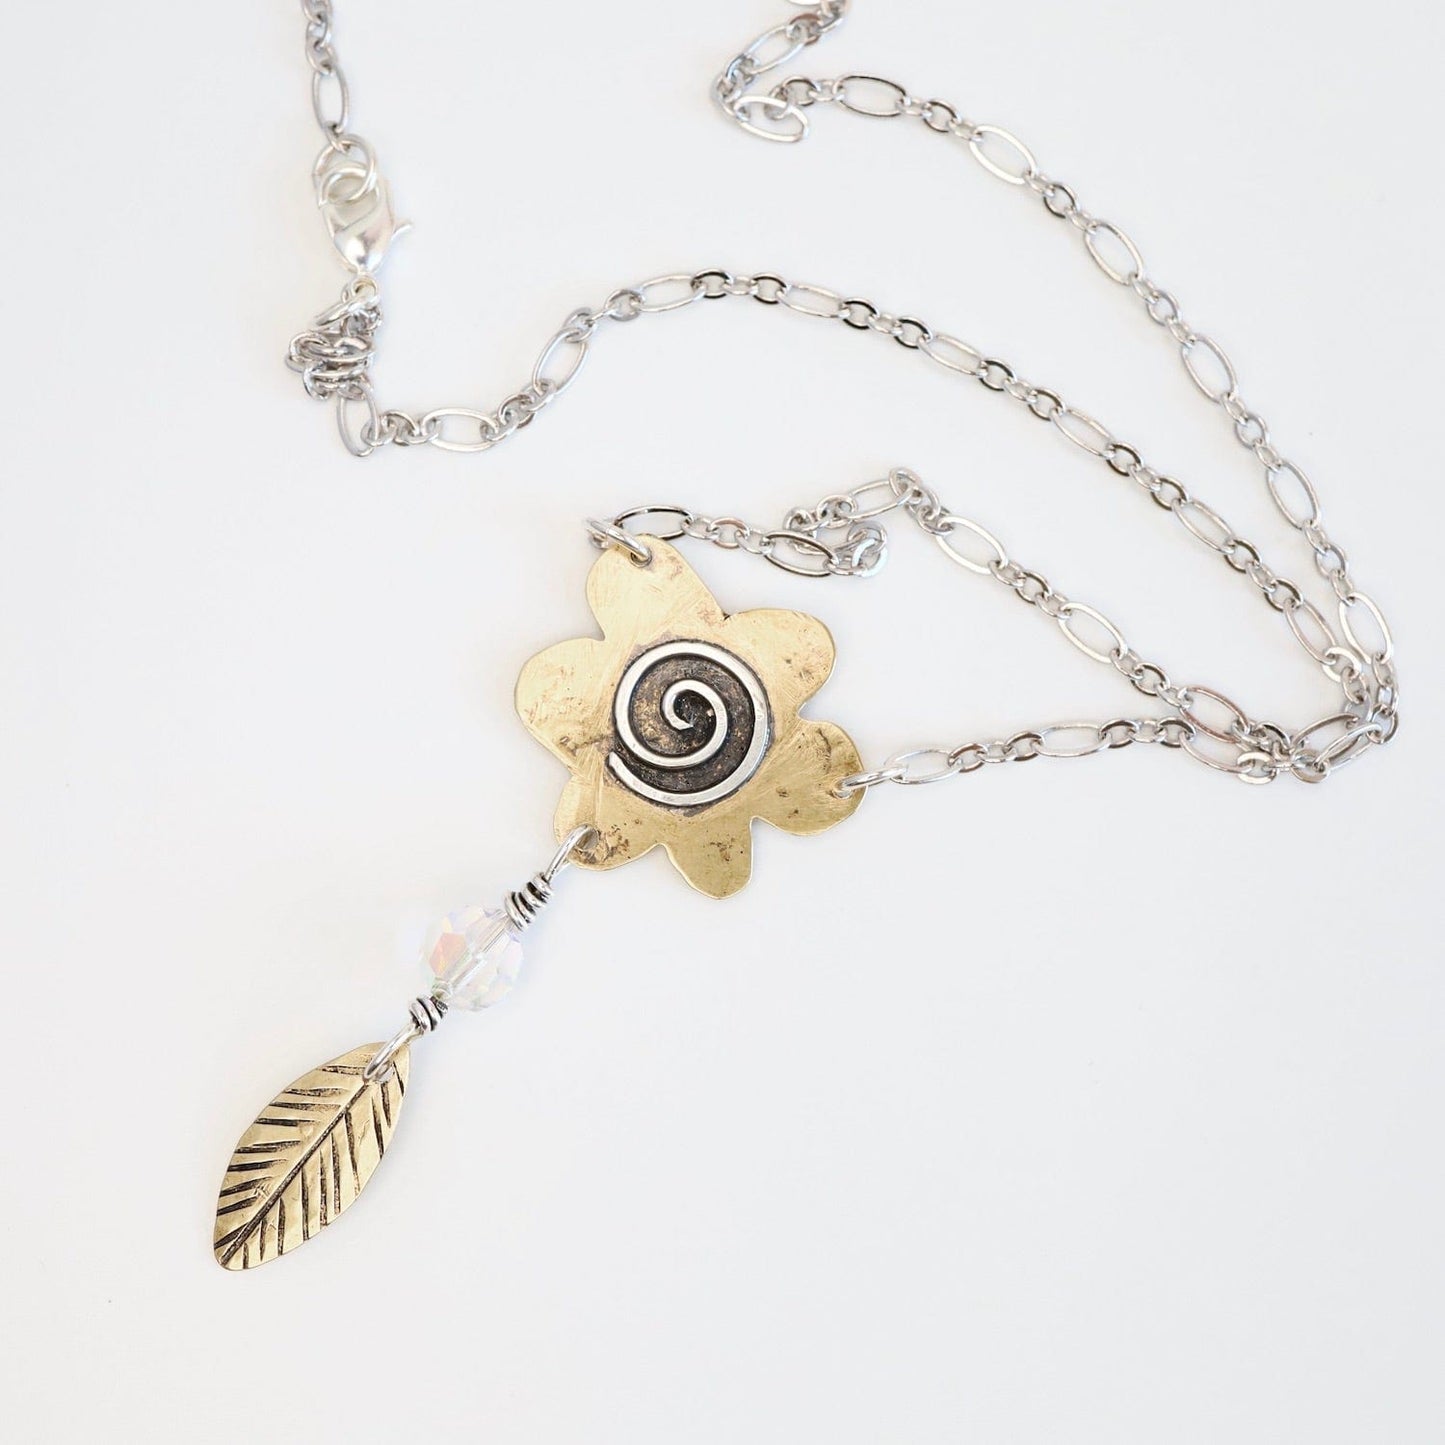 NKL Mixed Metal Flower Power Necklace